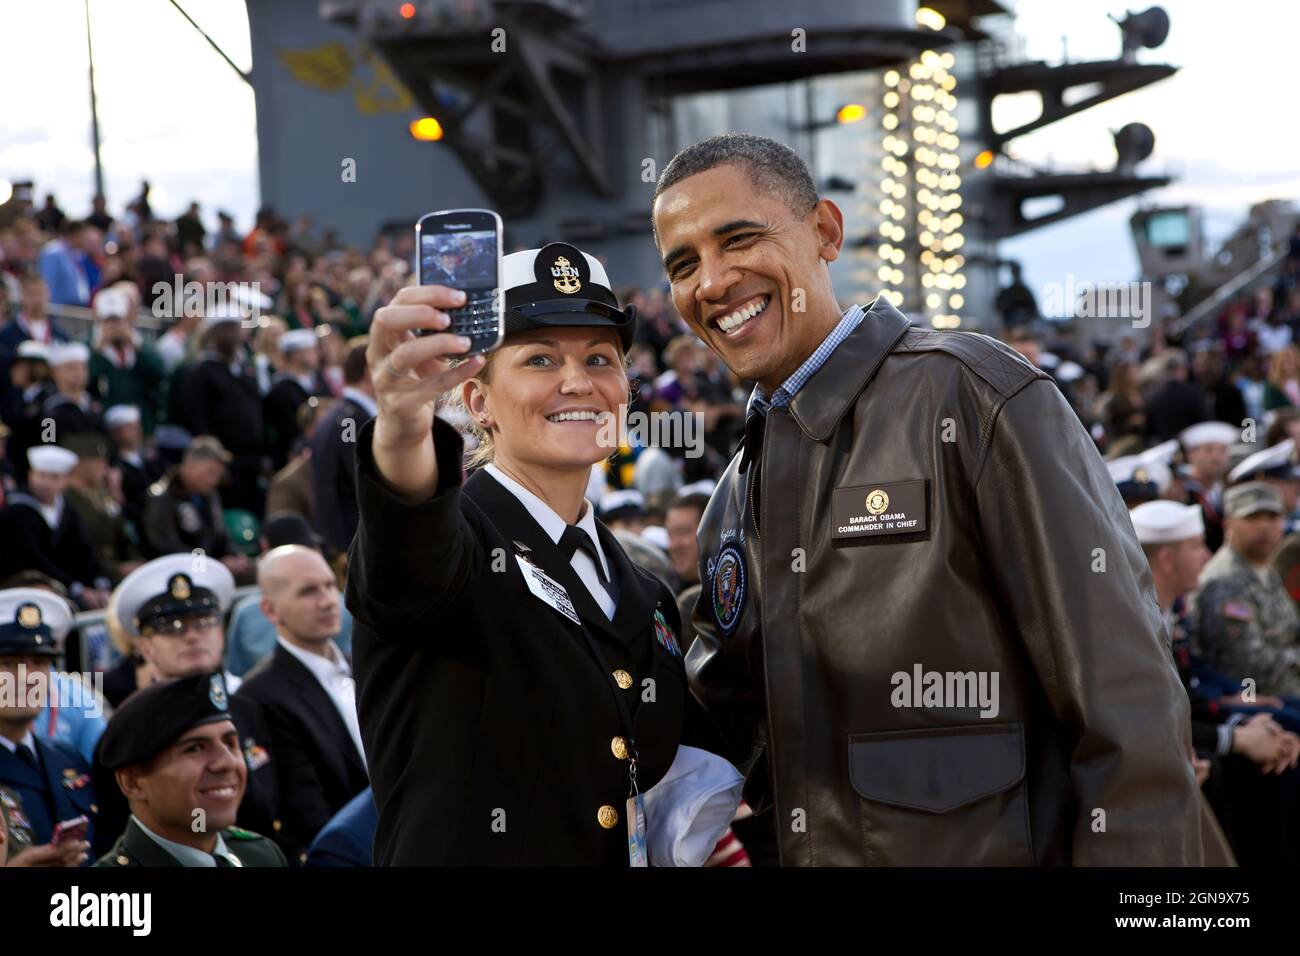 President Barack Obama has his picture taken with a member of the U.S. Navy on the flight deck of the USS Carl Vinson, docked at North Island Naval Station in San Diego, Calif., Nov. 11, 2011. (Official White House Photo by Pete Souza)  This official White House photograph is being made available only for publication by news organizations and/or for personal use printing by the subject(s) of the photograph. The photograph may not be manipulated in any way and may not be used in commercial or political materials, advertisements, emails, products, promotions that in any way suggests approval or Stock Photo